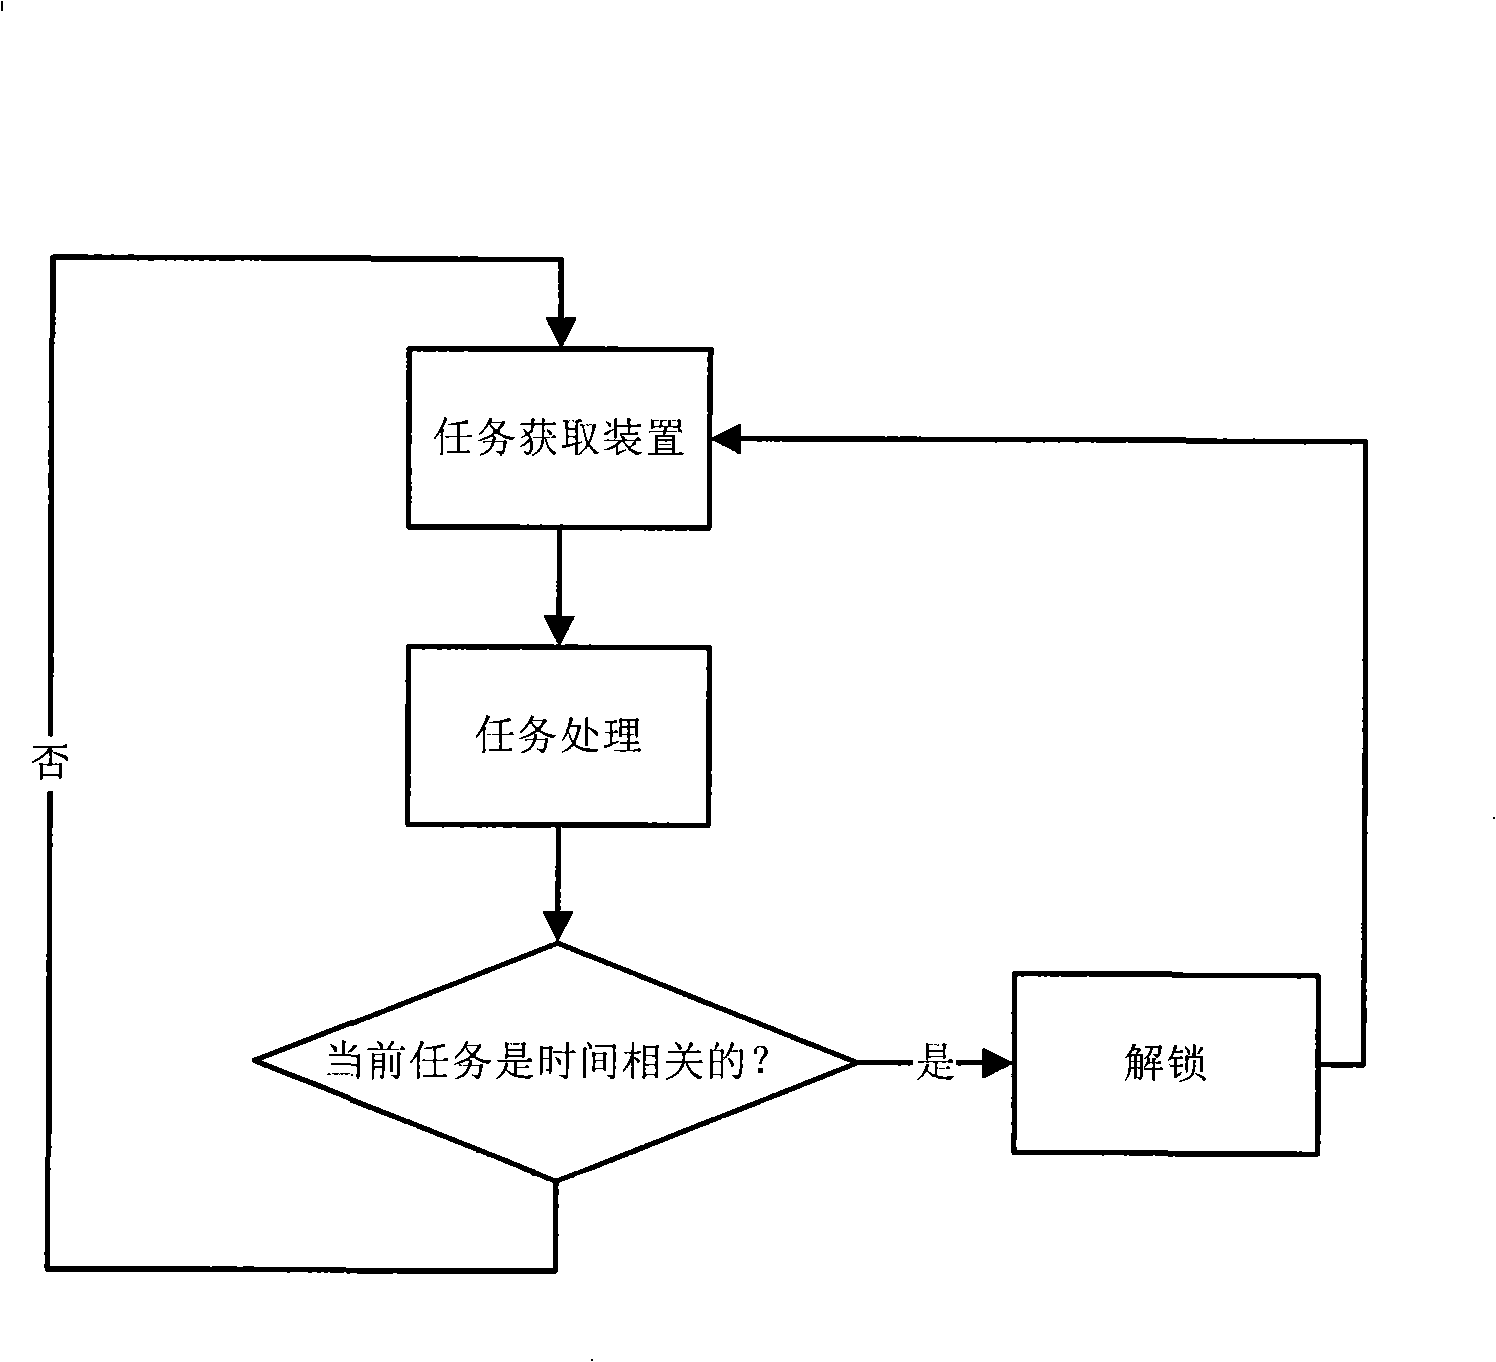 Multi- nuclear DSP system self-adapting task scheduling method